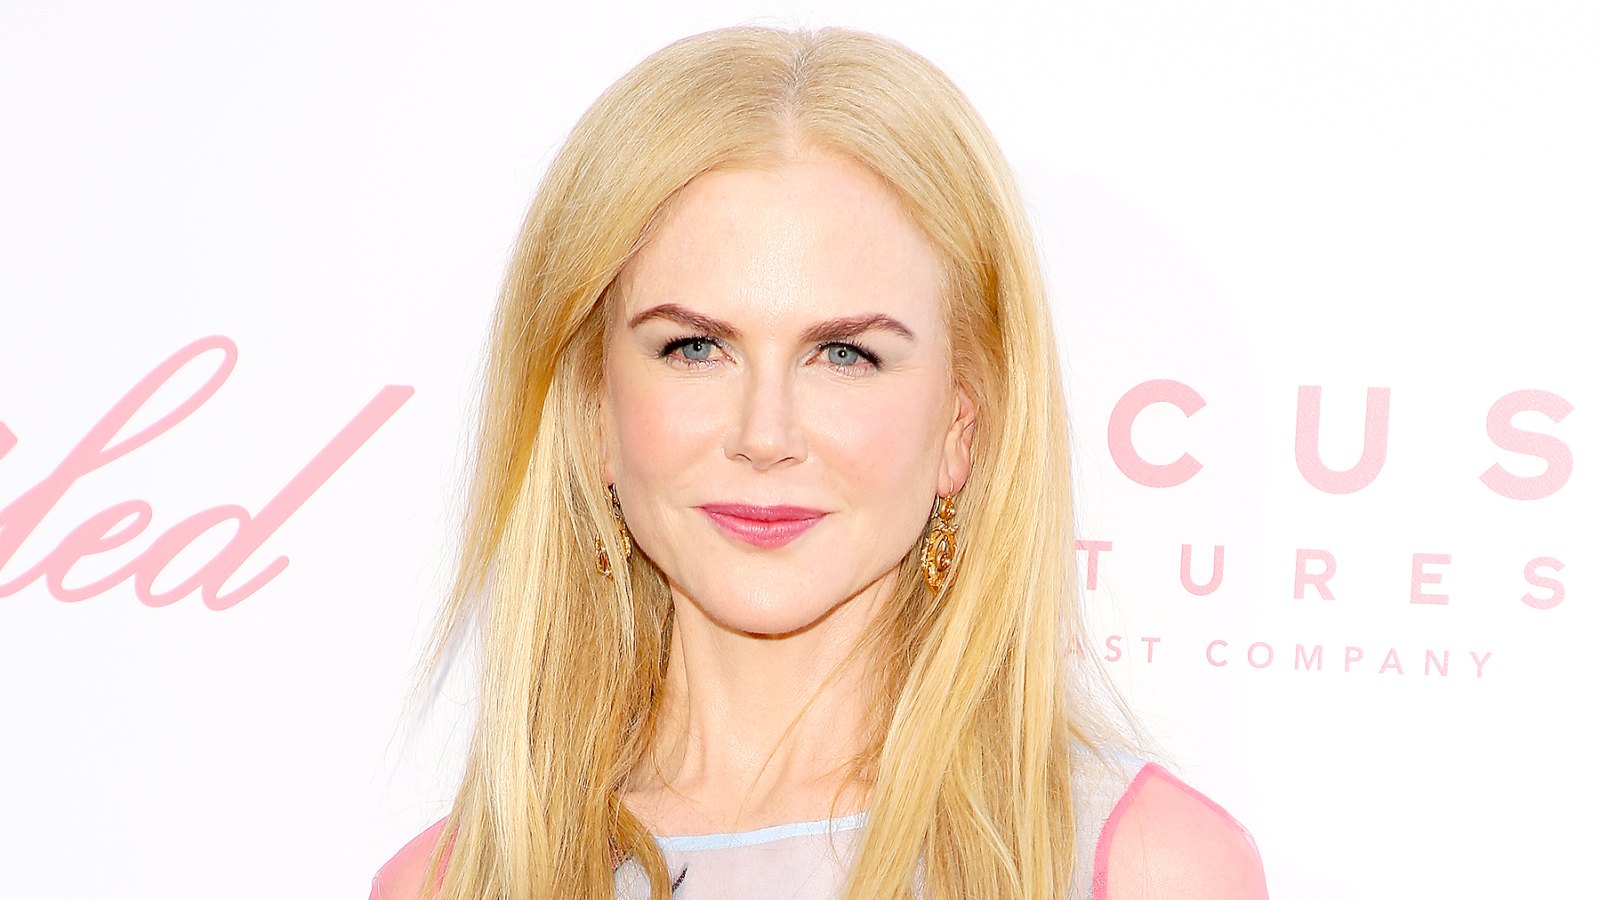 Nicole Kidman attends the premiere of 'The Beguiled' on June 12, 2017 in Los Angeles, California.